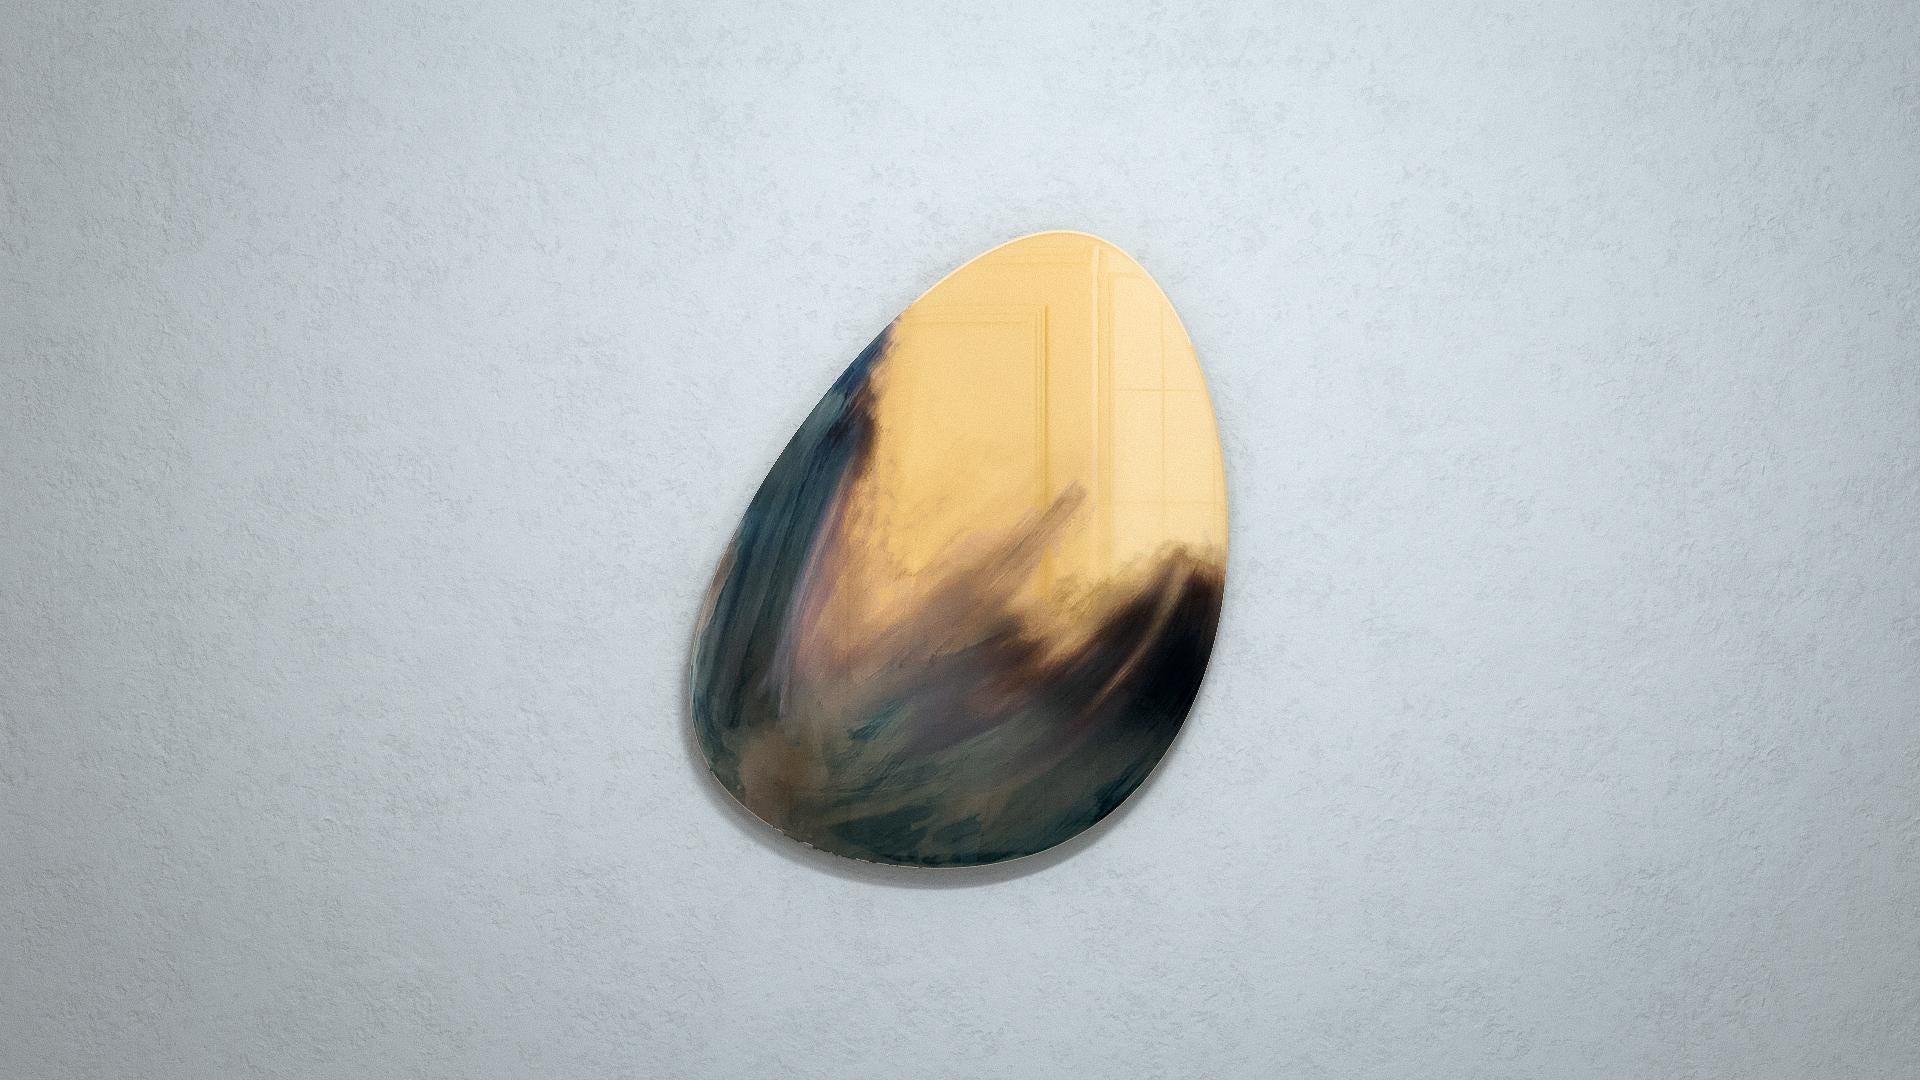 Narcissus mirror by Arthur Vallin
Dimensions: W 66 x D 8 x H 91 cm 
Materials: Brass
Customizable shape and dimensions on demand.

French Artist, Designer, and Creative Director Arthur Vallin hold a master’s degree in Art Direction from the